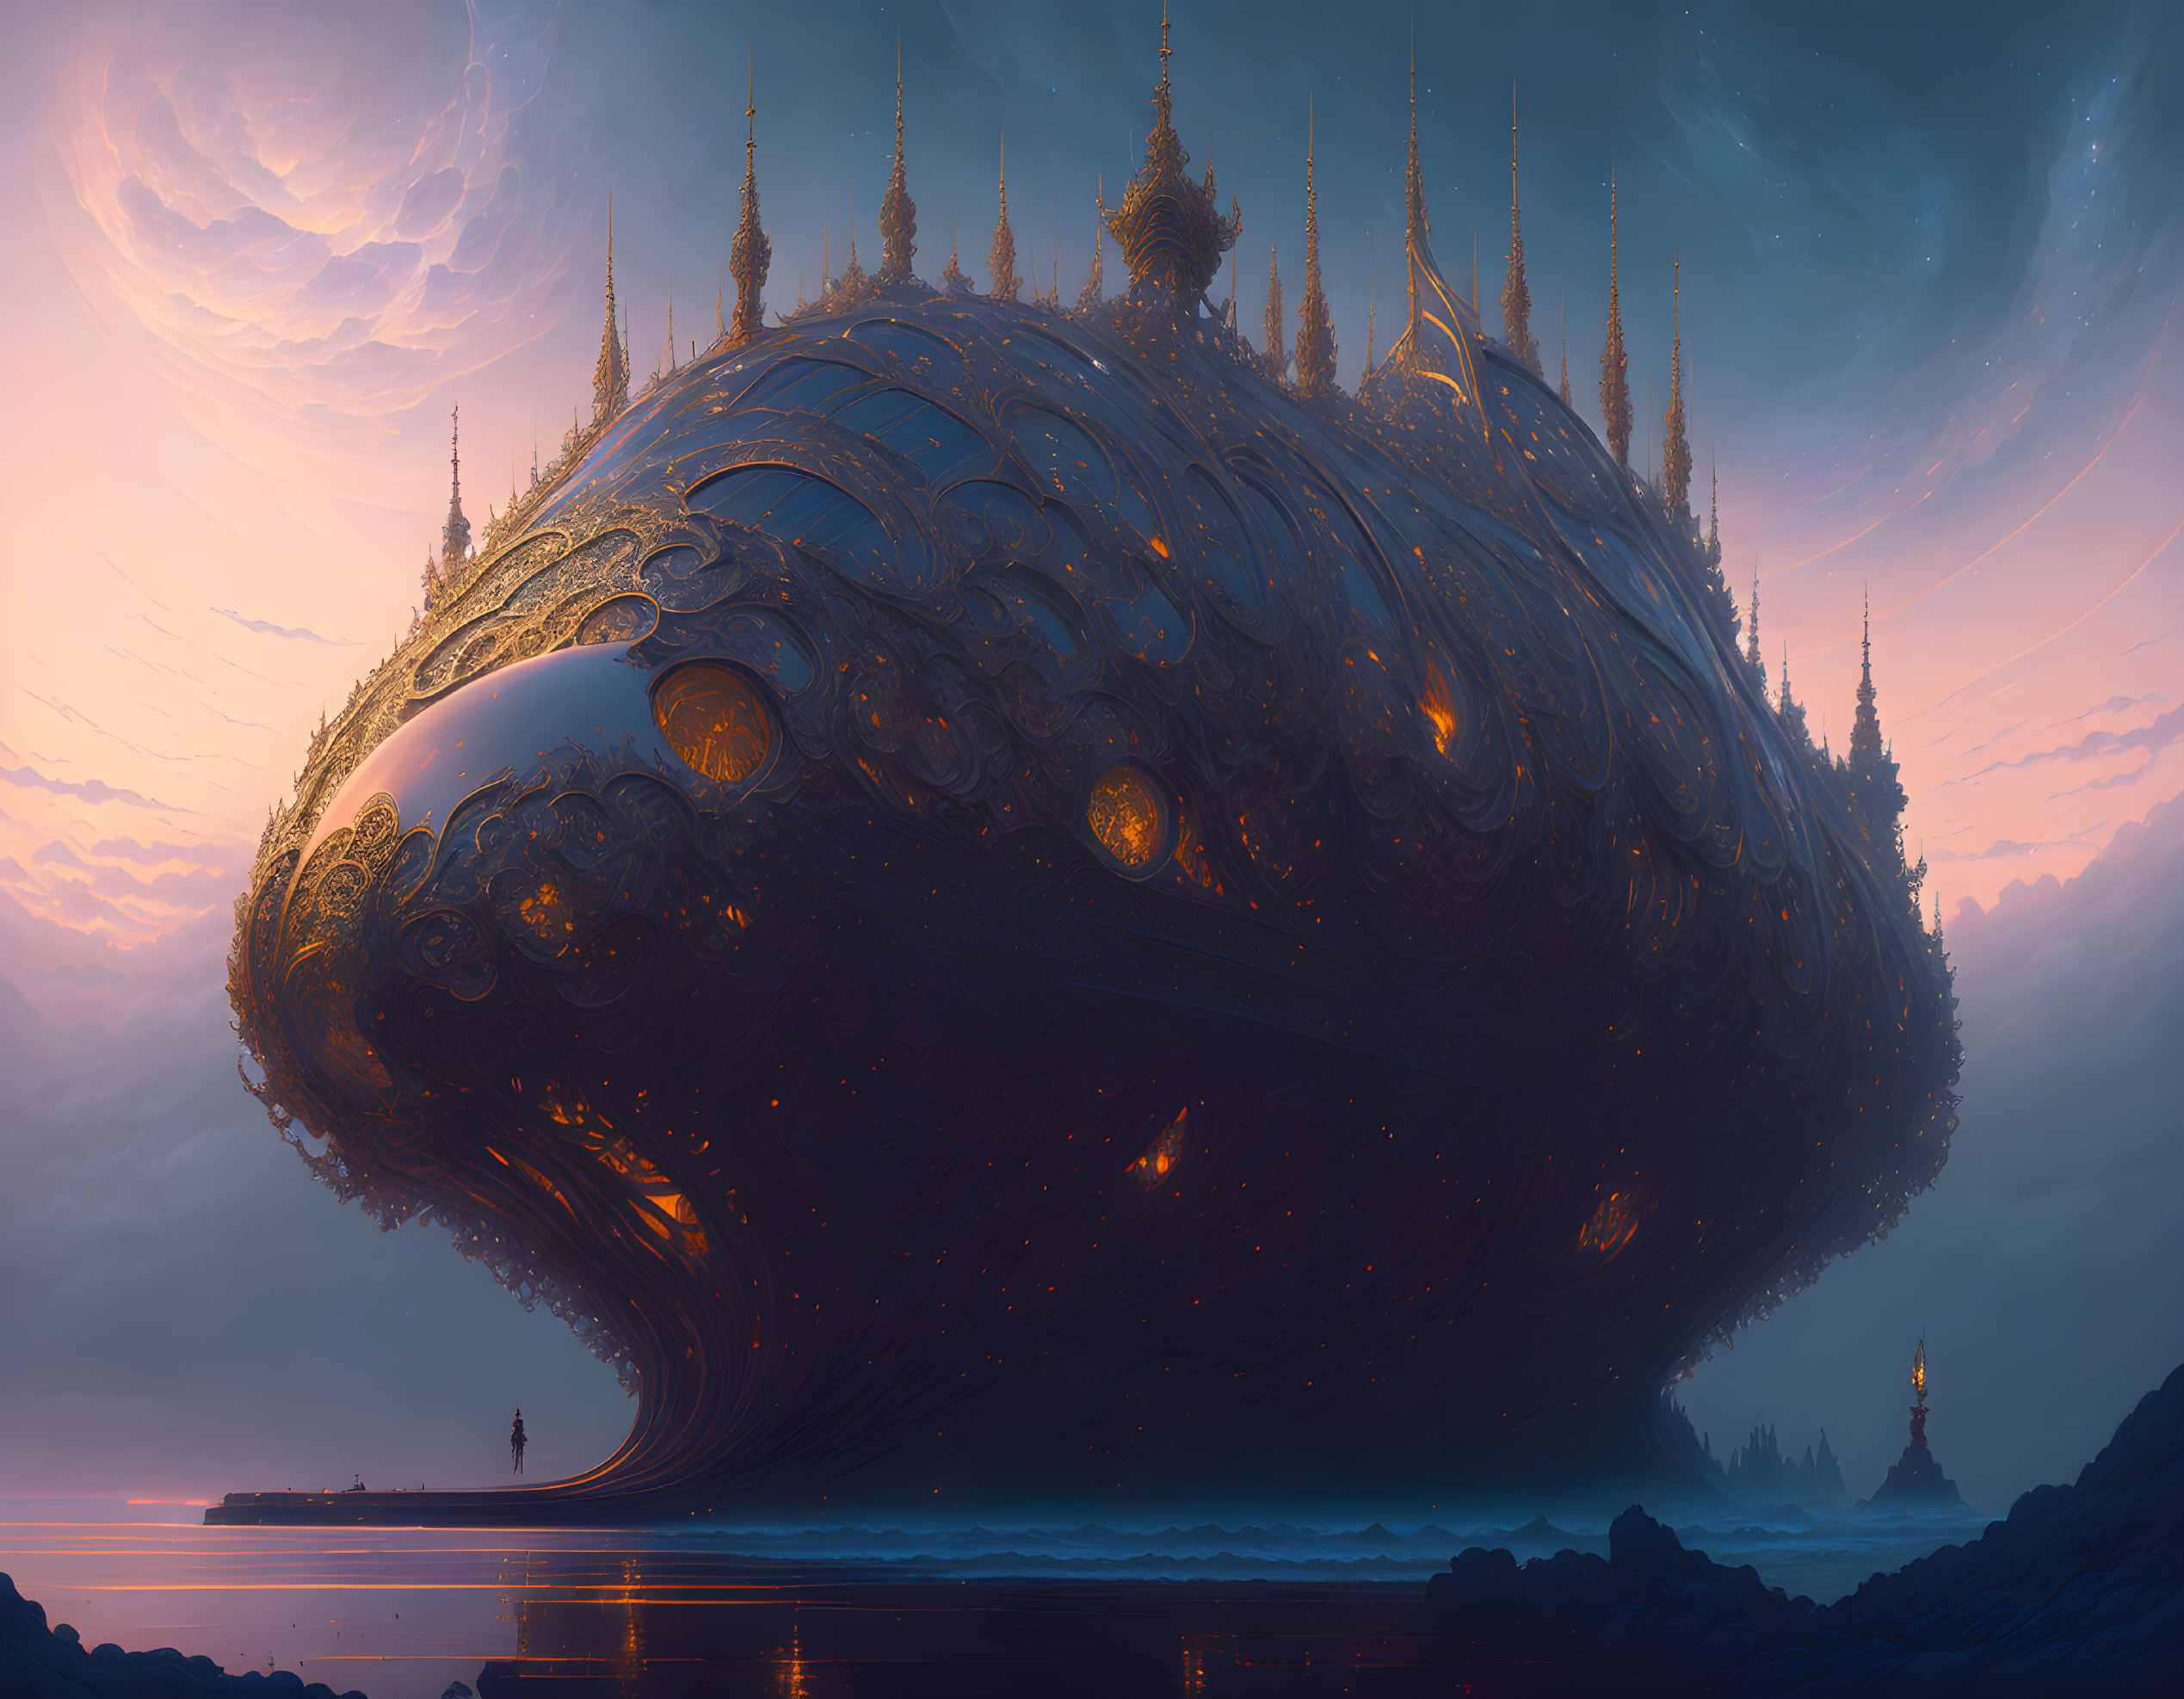 Fantastical art of giant ornate airship floating above tranquil sea at dusk